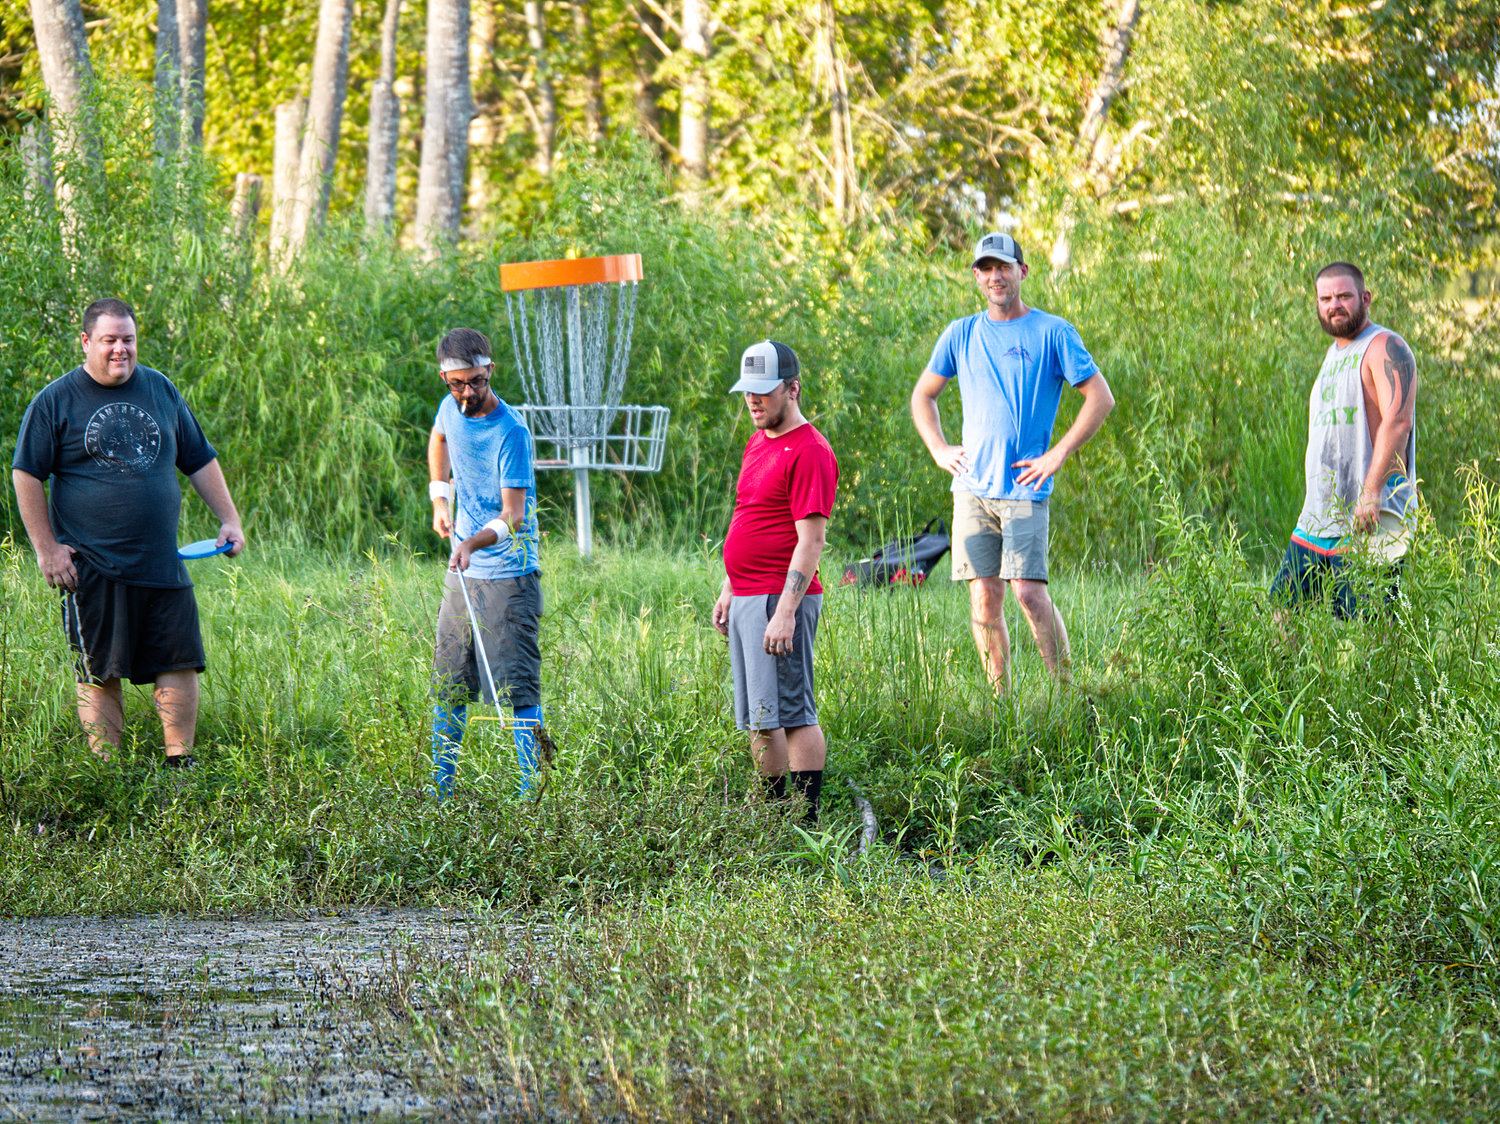 Hooked, Offline, SinkerDisc golfers try to rescue a putter from Grandpa’s Pond next to a hole on The Preserve disc golf course Monday evening at the Mineola Nature Preserve.